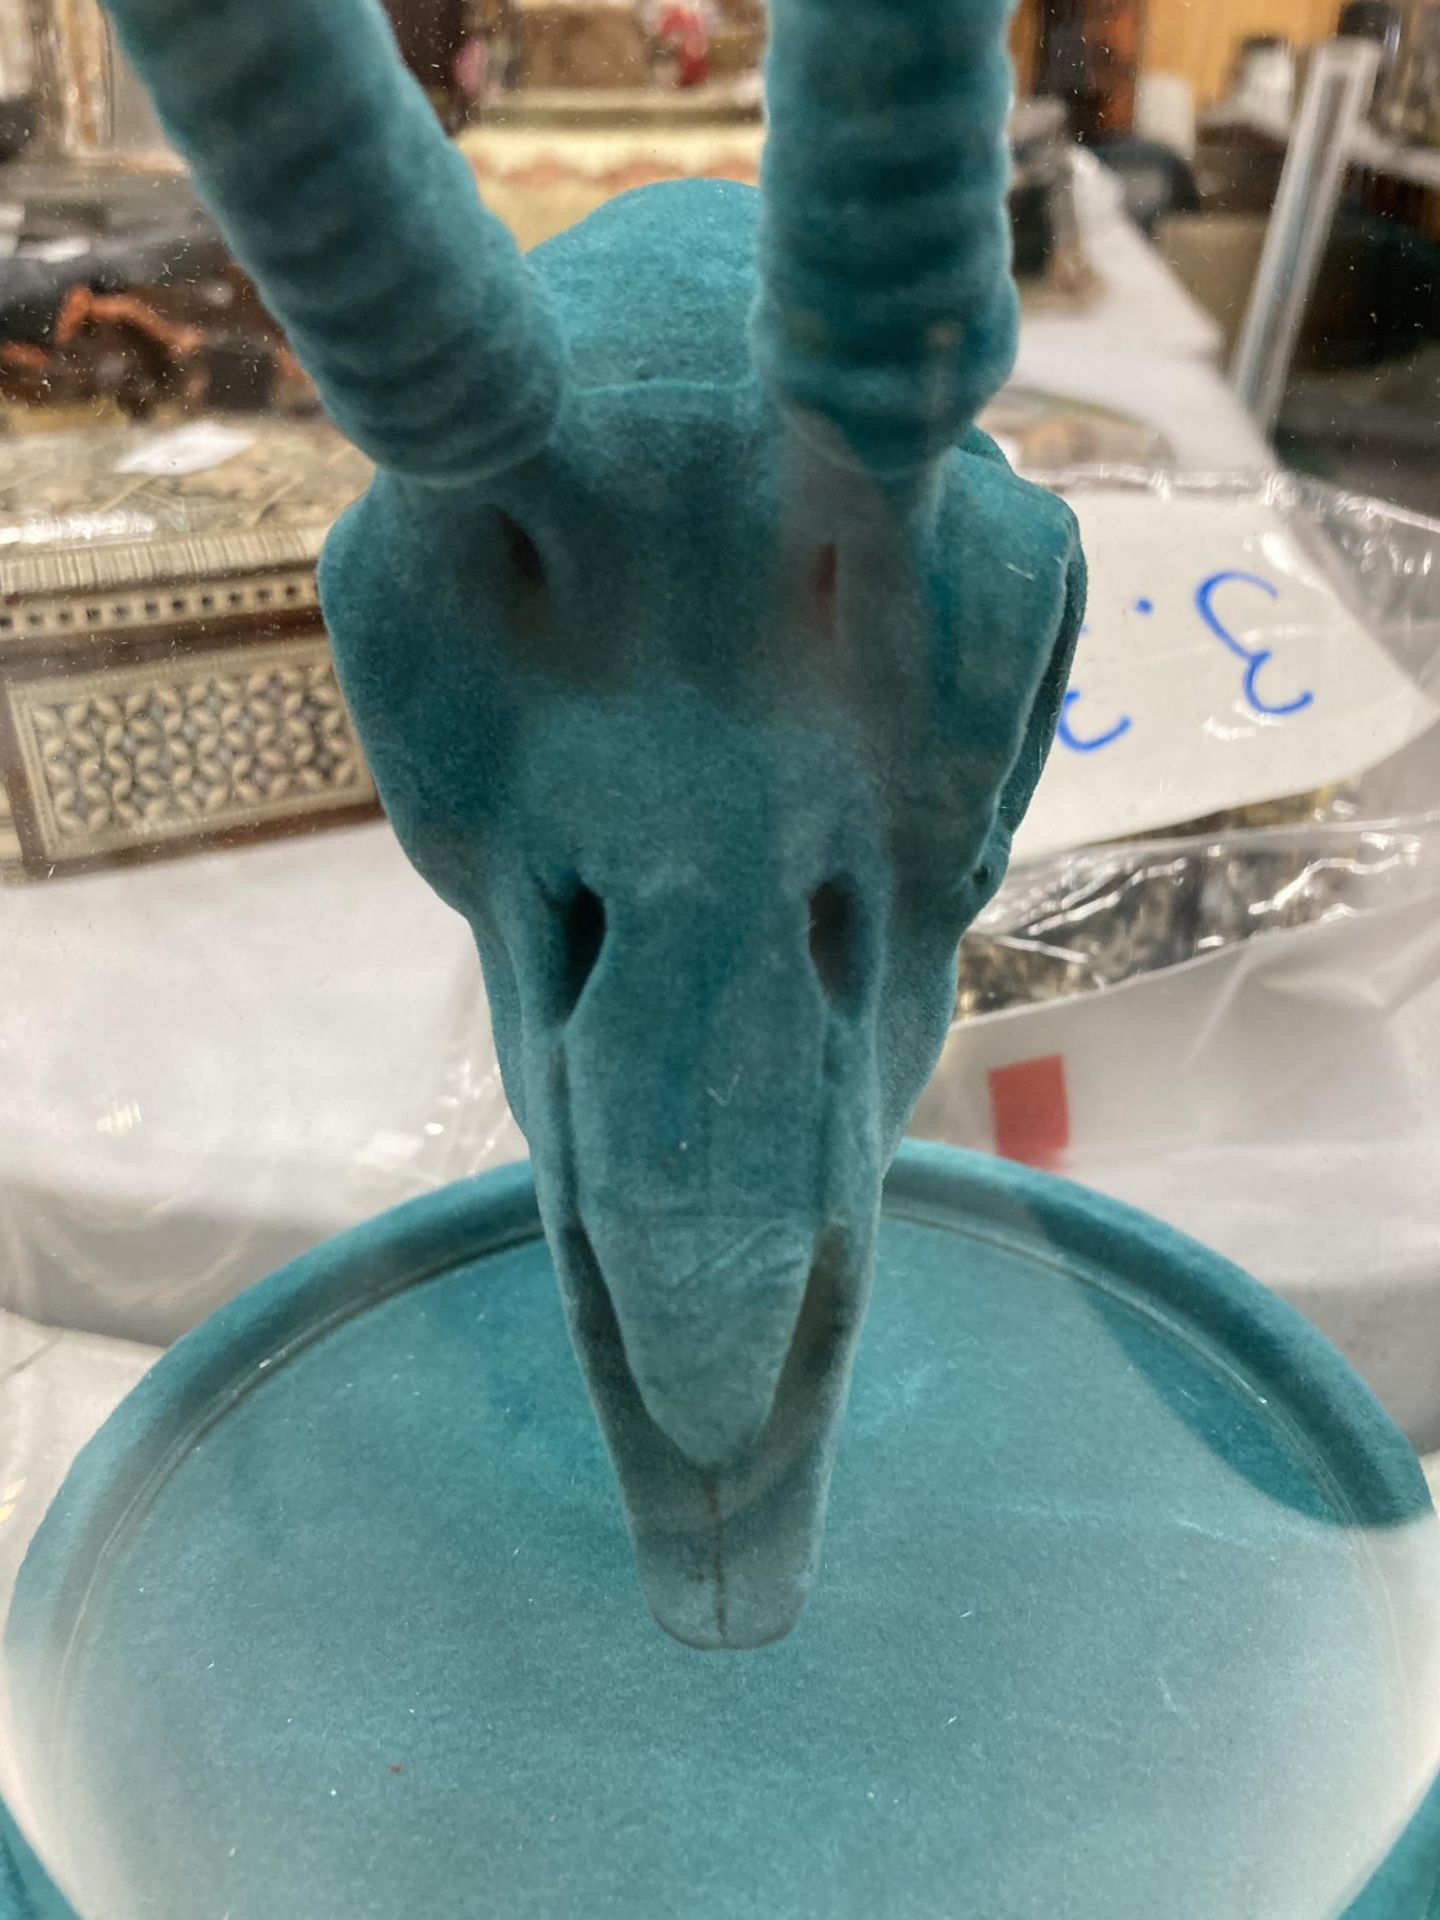 A TURQUOISE ANIMAL SKULL IN A GLASS DOME - Image 2 of 4